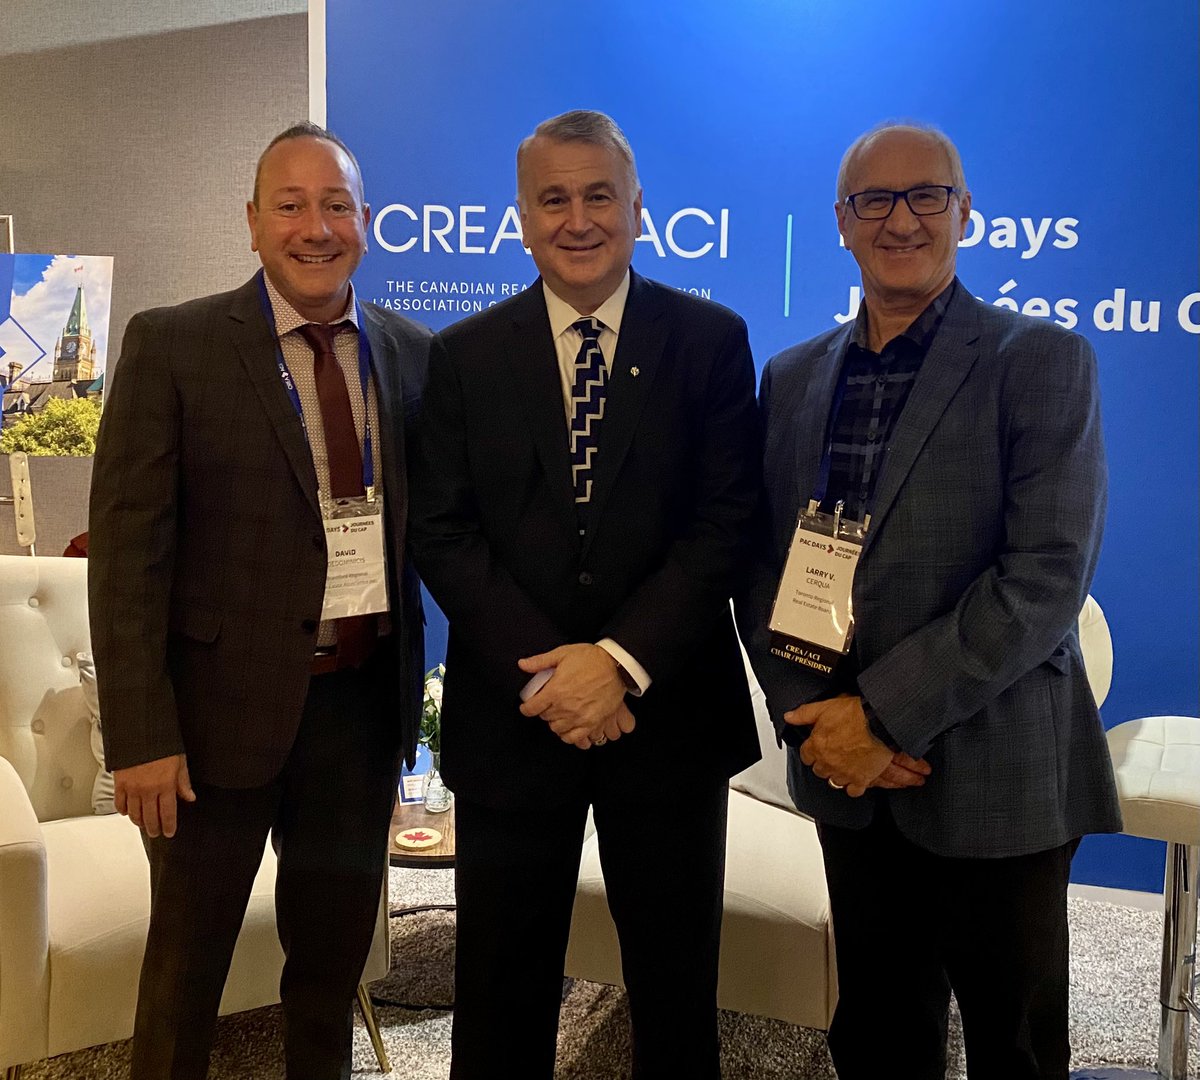 A pleasure catching up with these fine gents at CREA PAC days in Ottawa. 
#creapac23